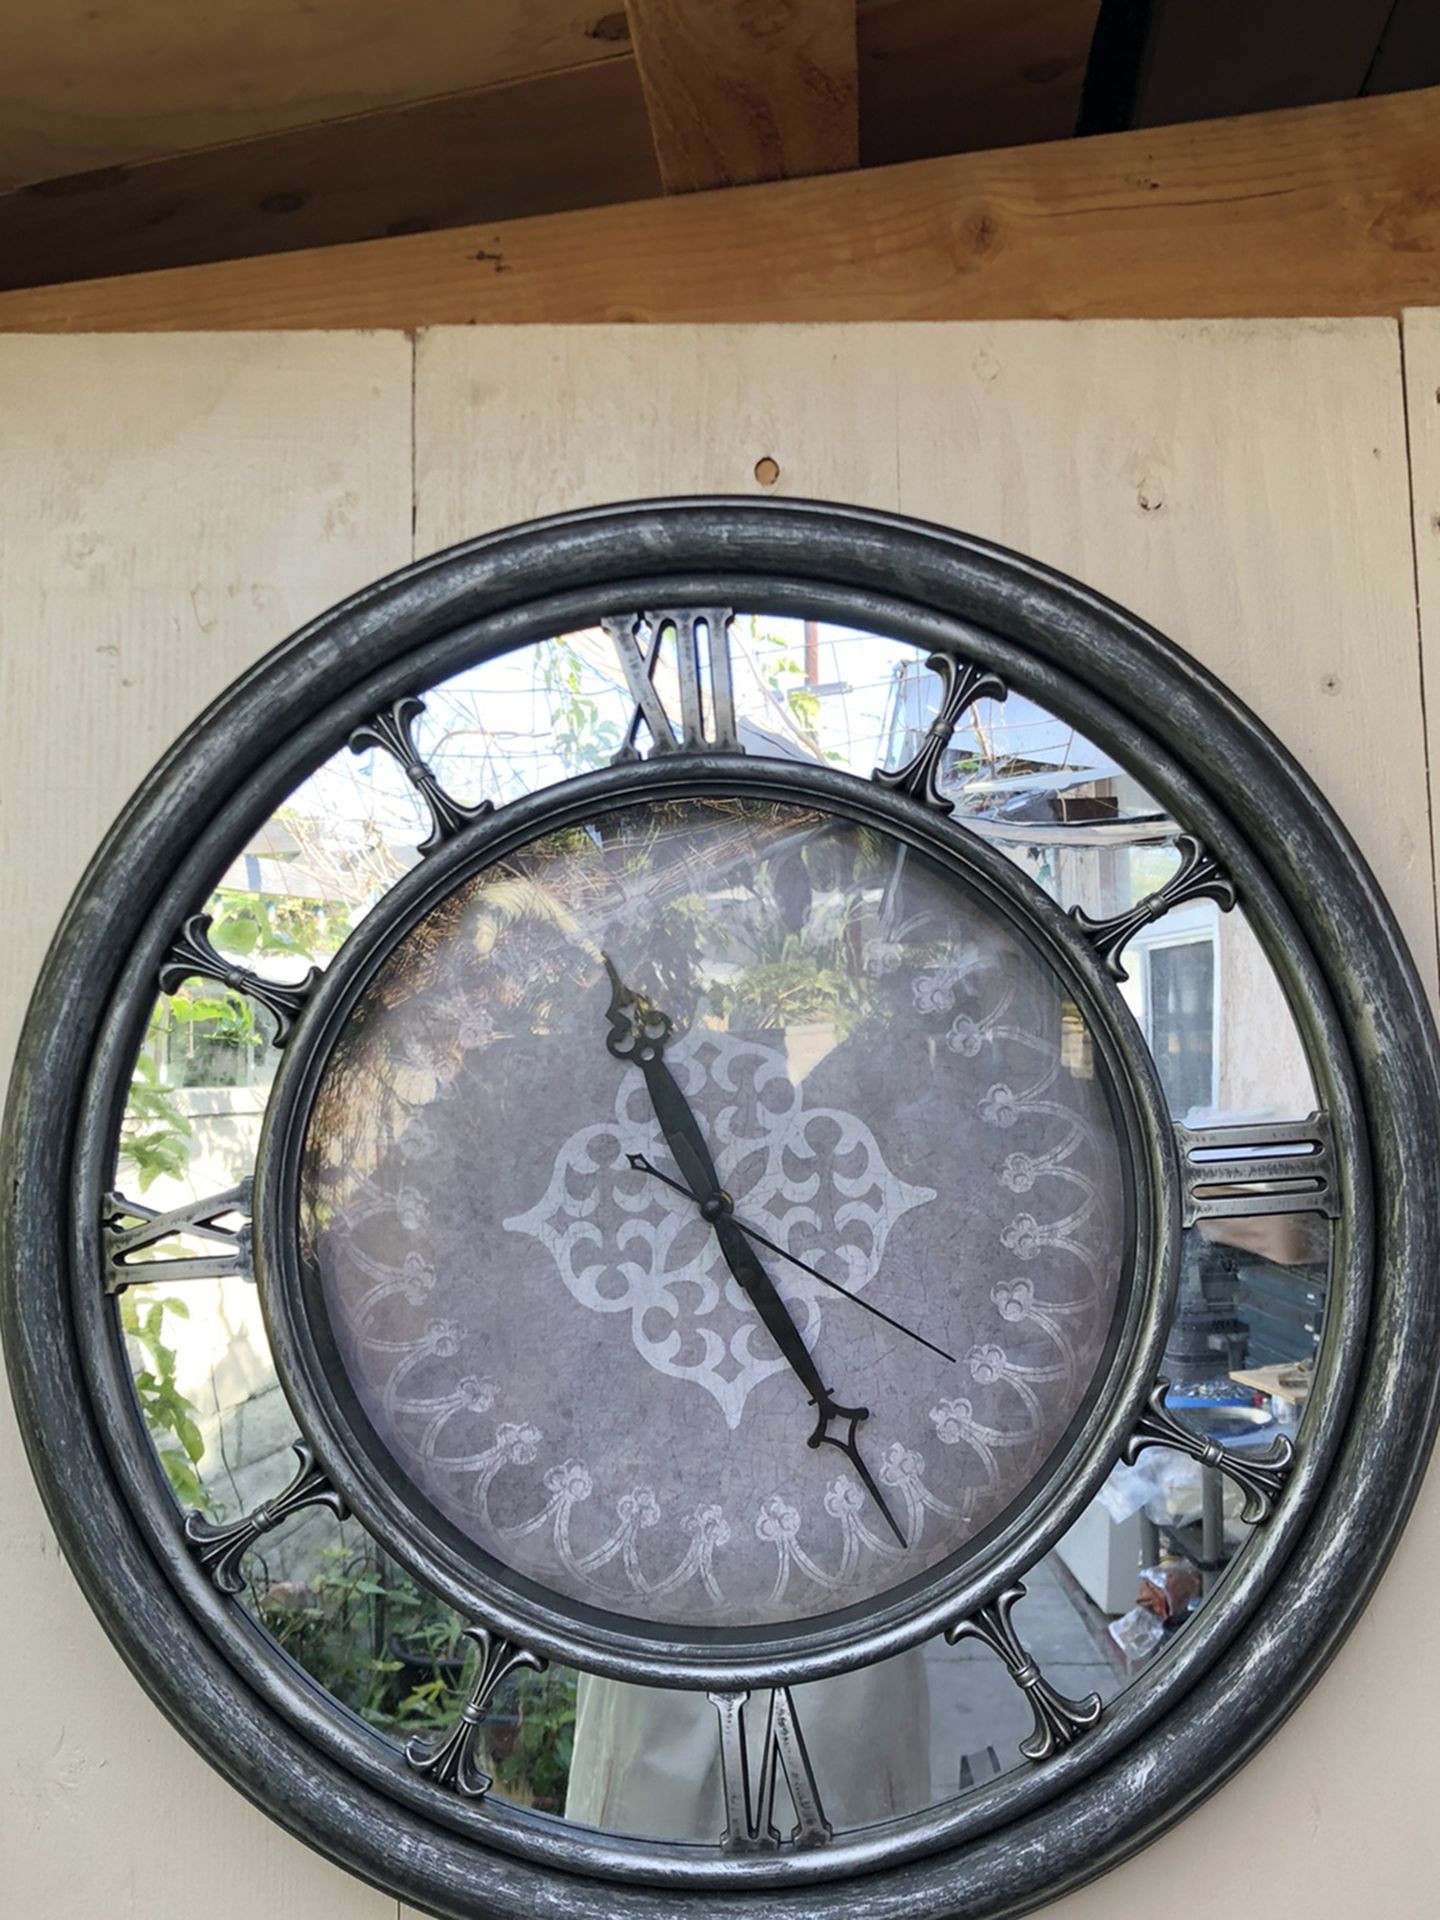 BIG WALL CLOCK WITH MIRRORS - 21 inches